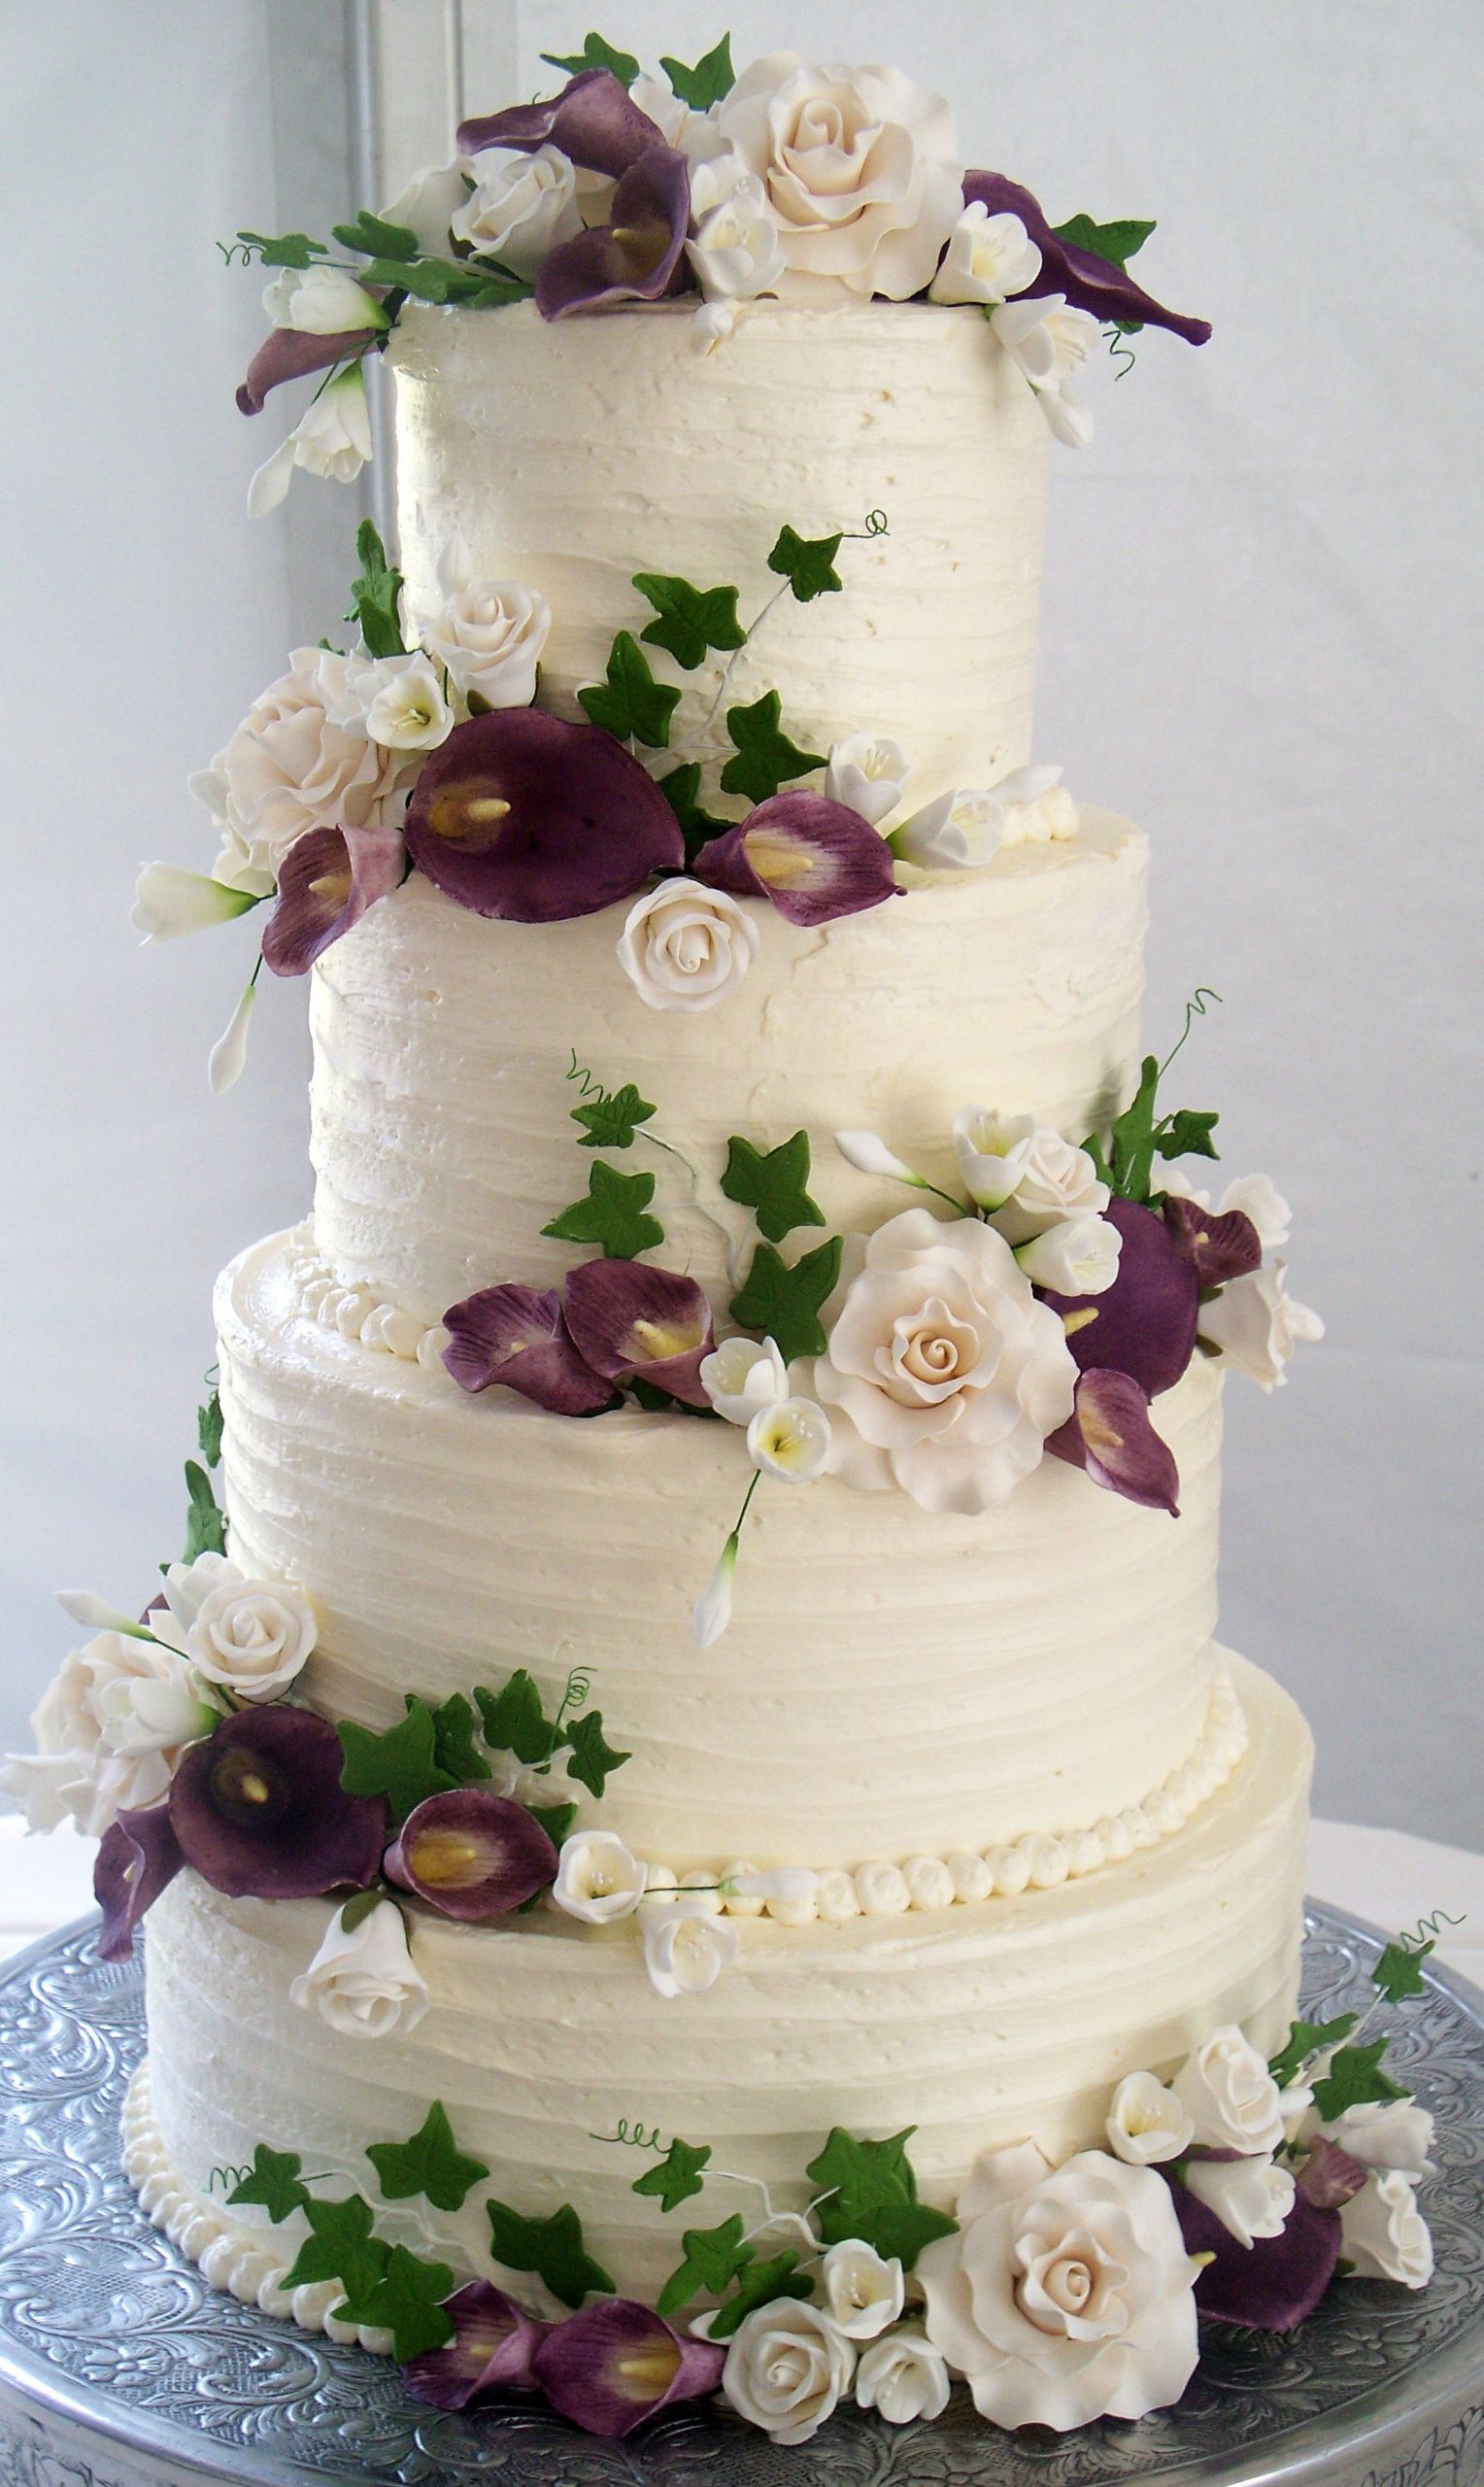 Wedding Cake Recipes For Tiered Cakes
 4 tier wedding cake textured buttercream and coordinating